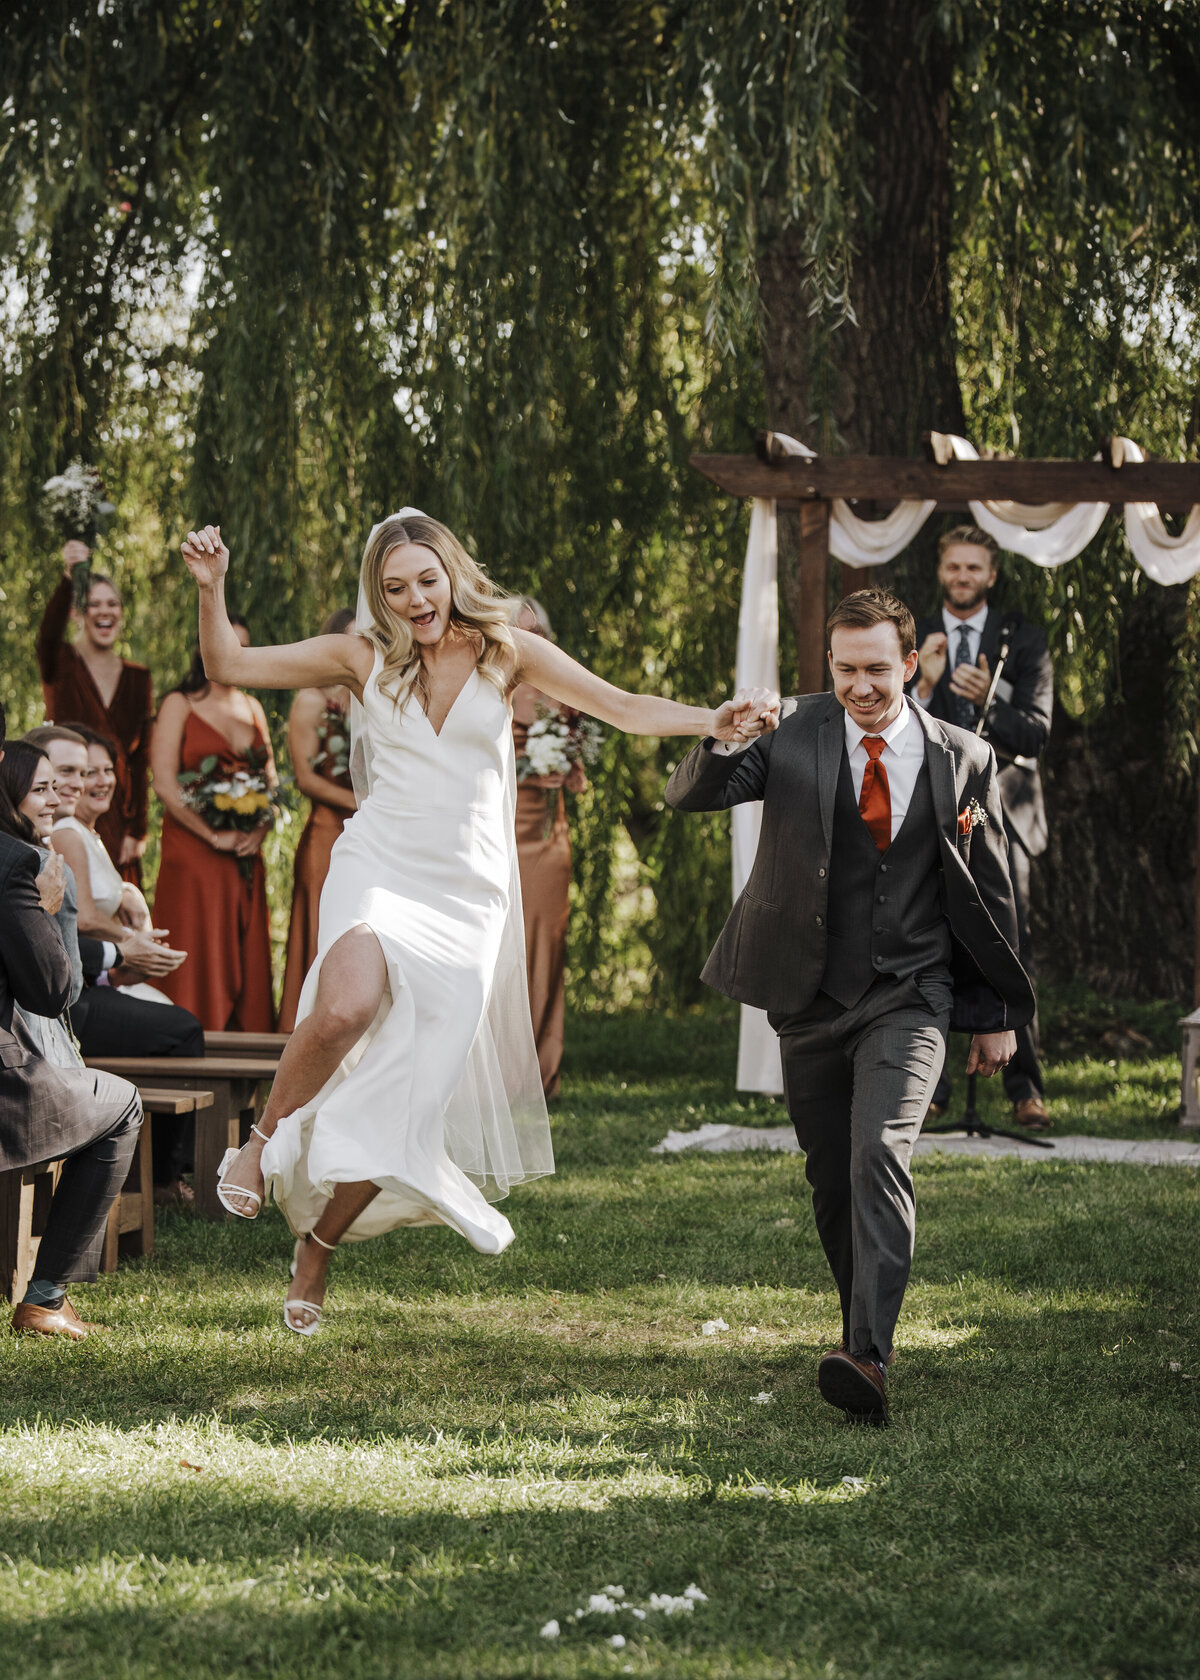 A joyful bride jumping kicking for joy and groom holding hands and running, with smiles on their faces, as guests cheer them on in an outdoor wedding setting taken by jen Jarmuzek photography a Minneapolis wedding photographer